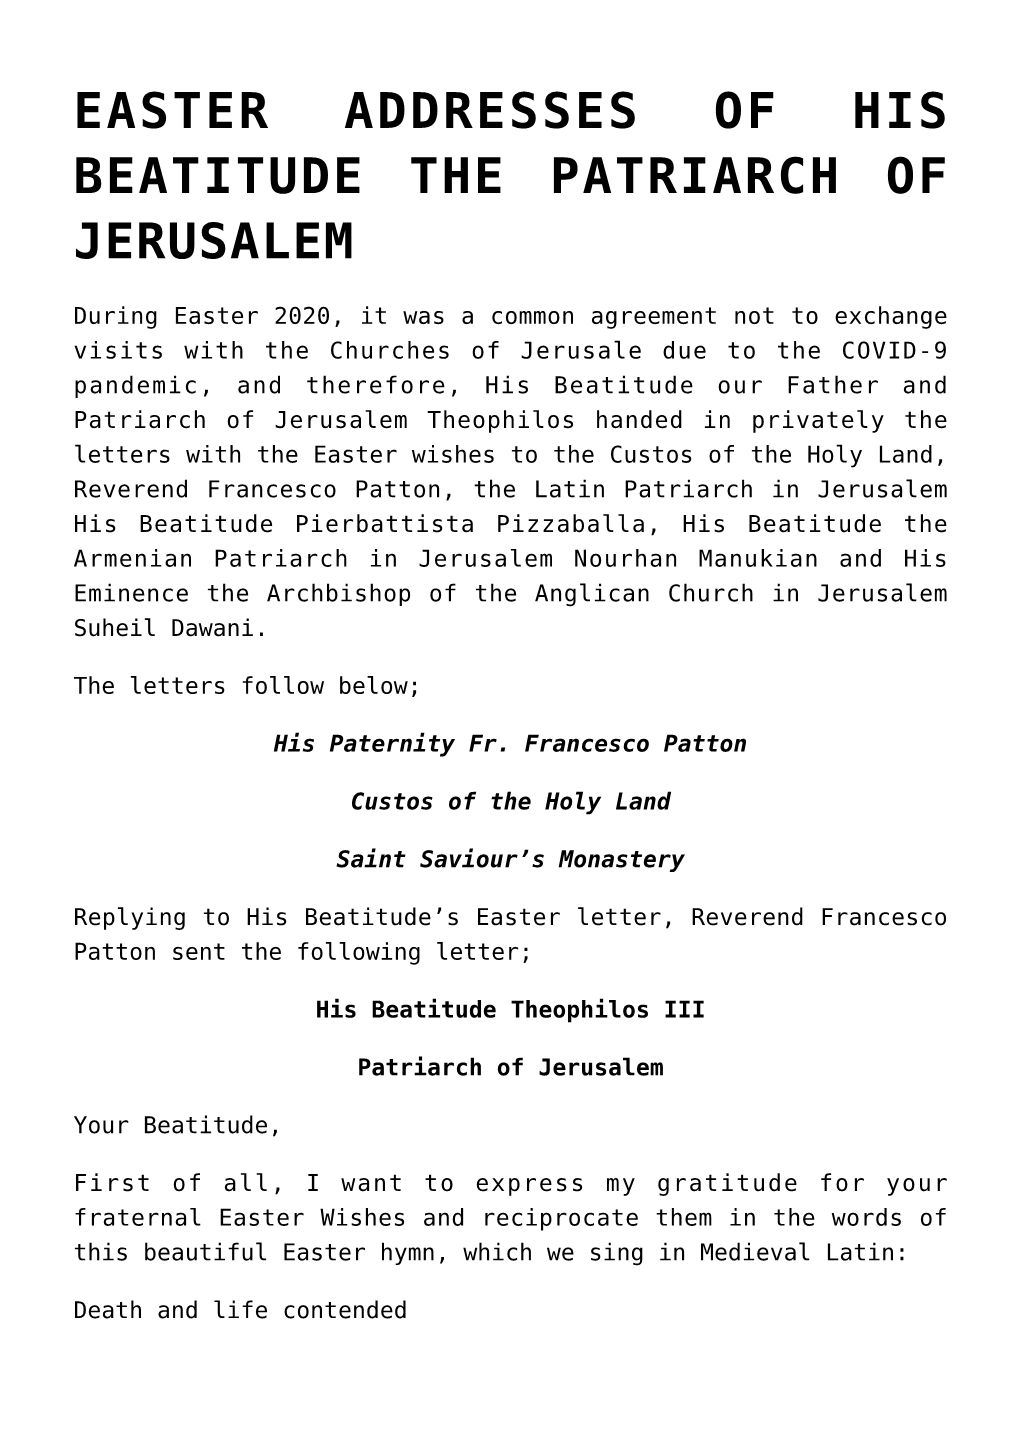 Easter Addresses of His Beatitude the Patriarch of Jerusalem